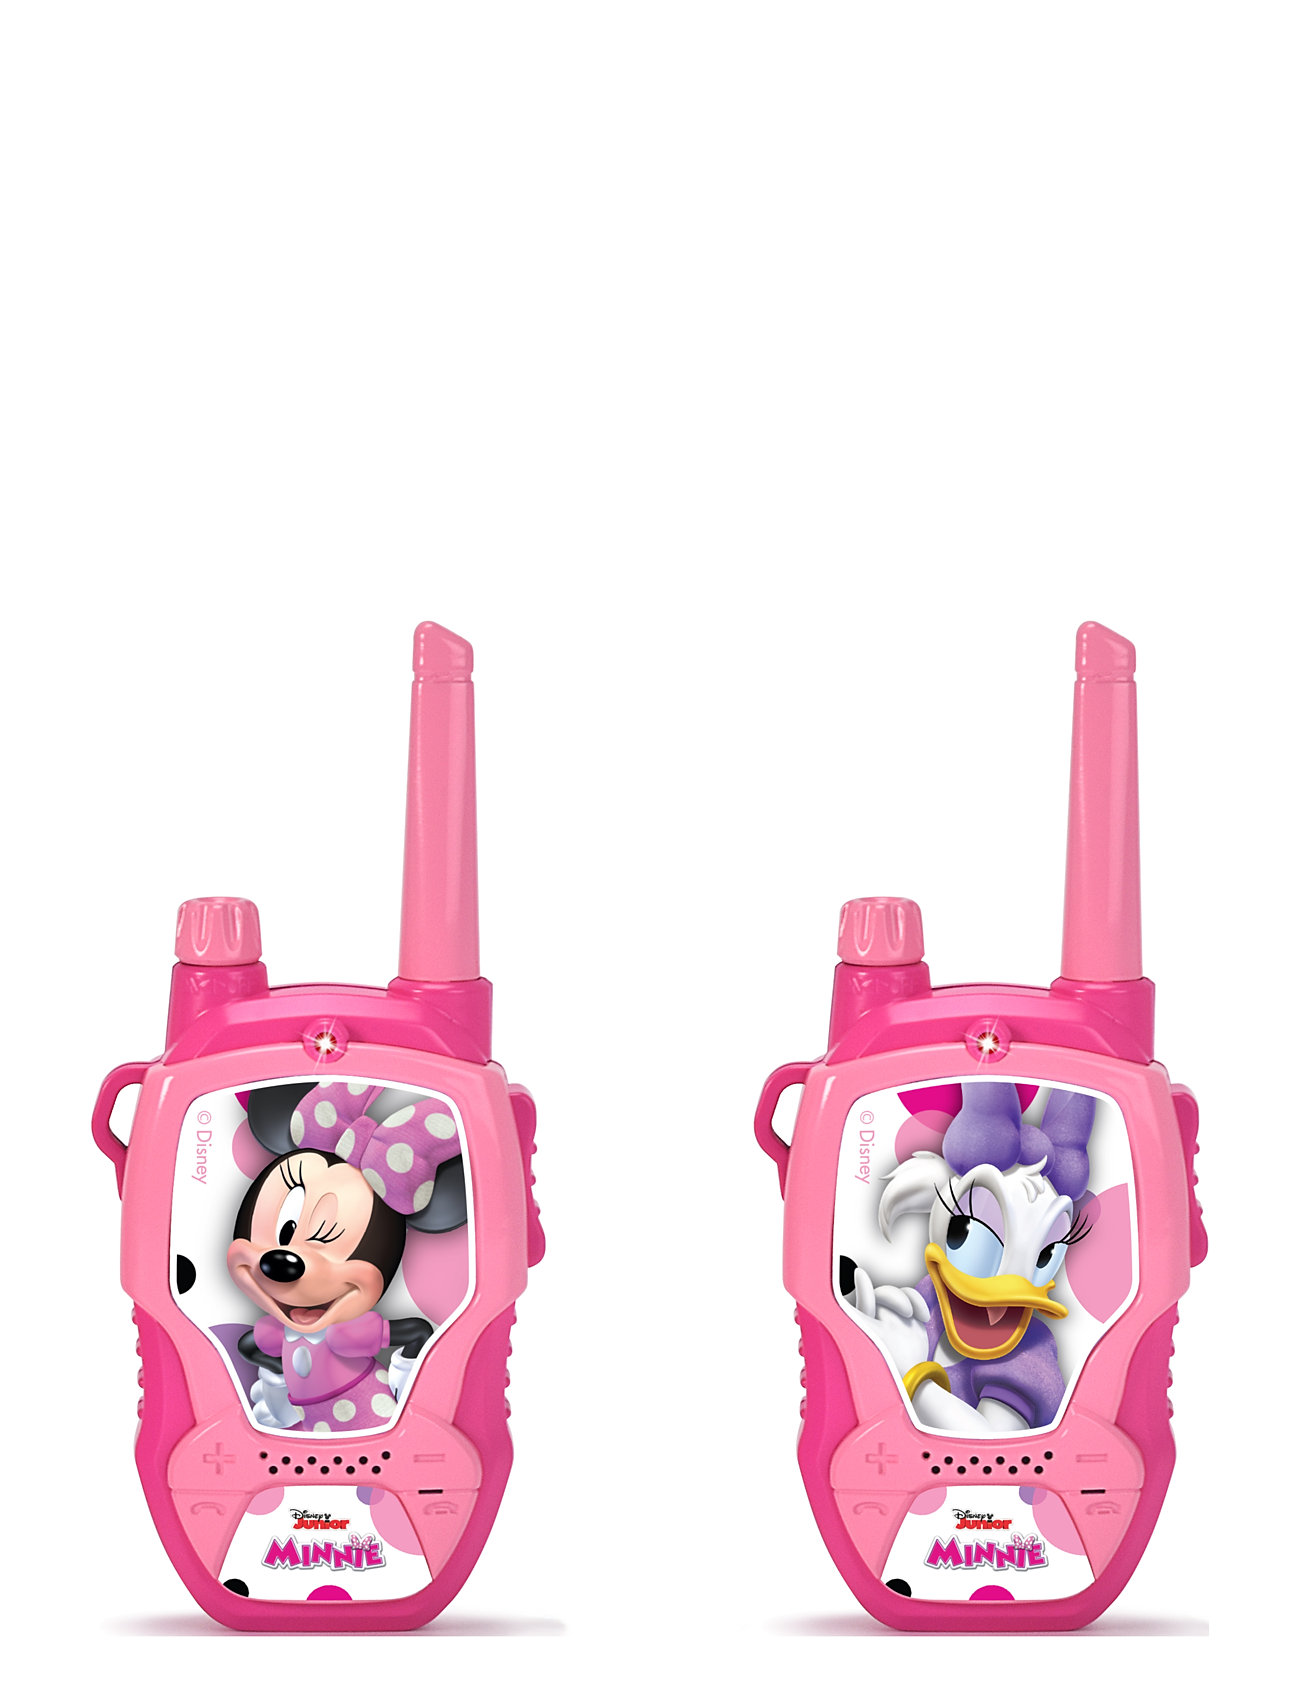 Walkie Talkie Minnie Mouse Toys Electronic & Media Pink Dickie Toys